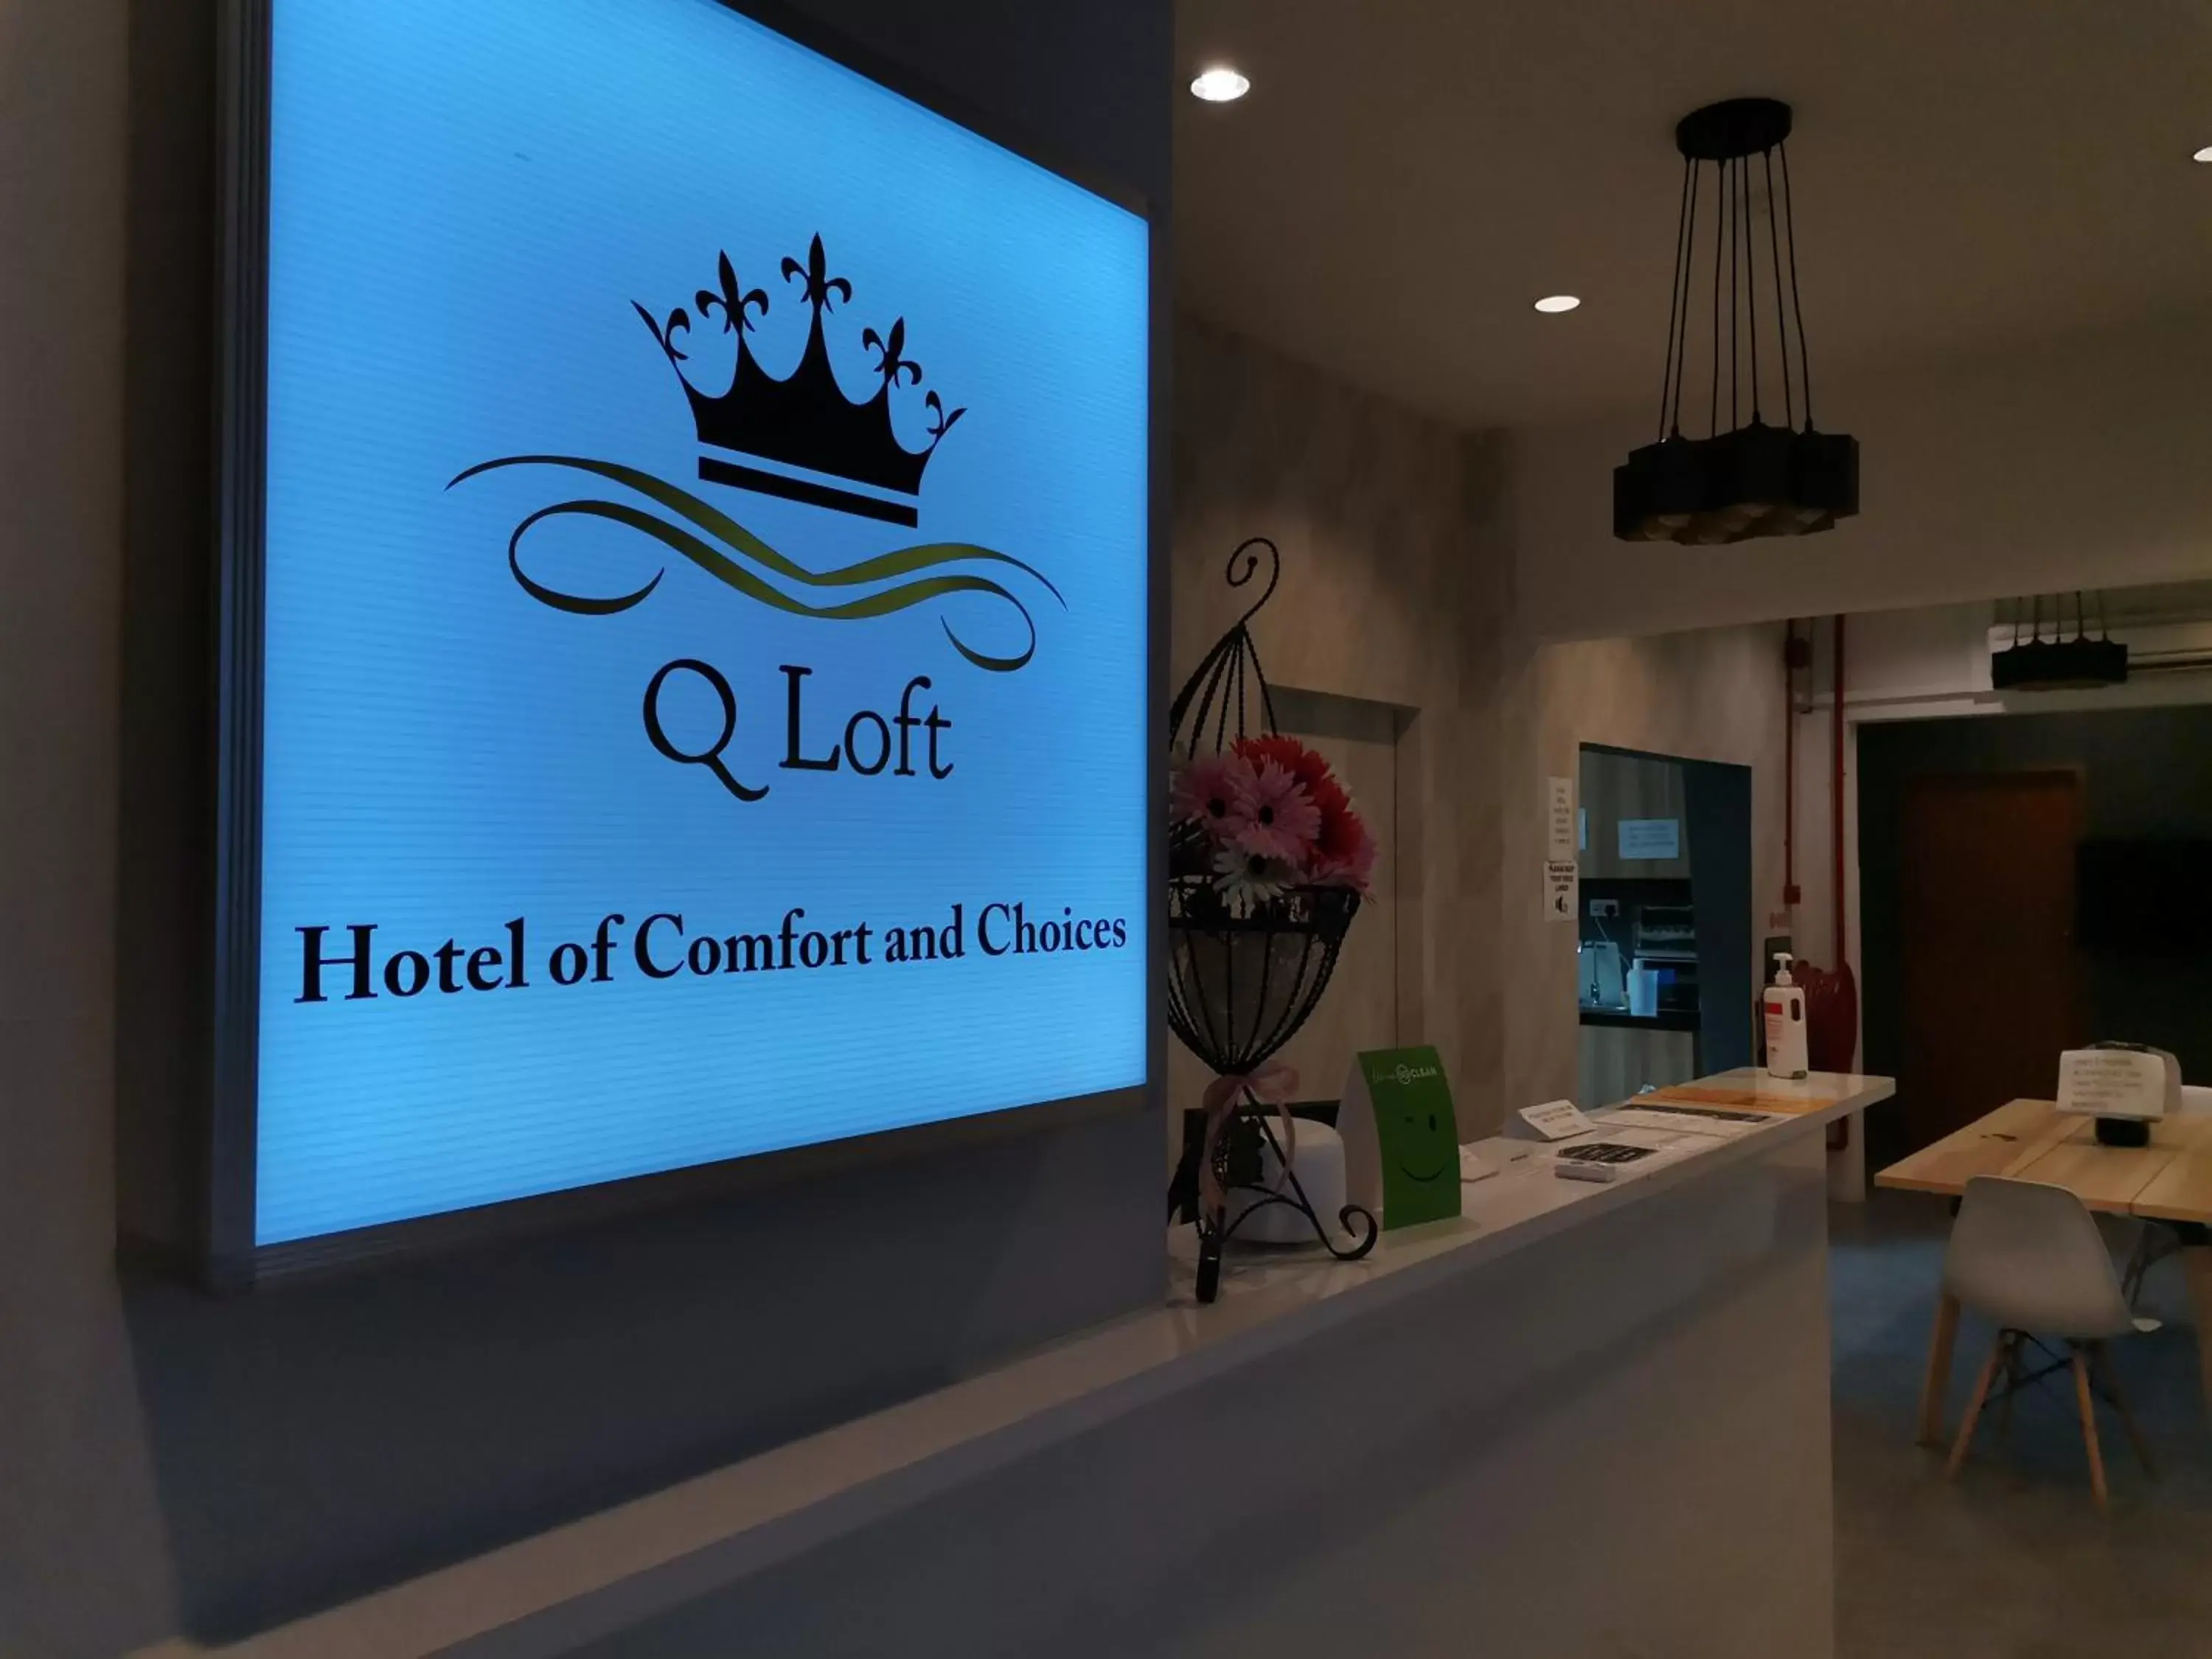 Area and facilities in Q Loft Hotels at Bedok